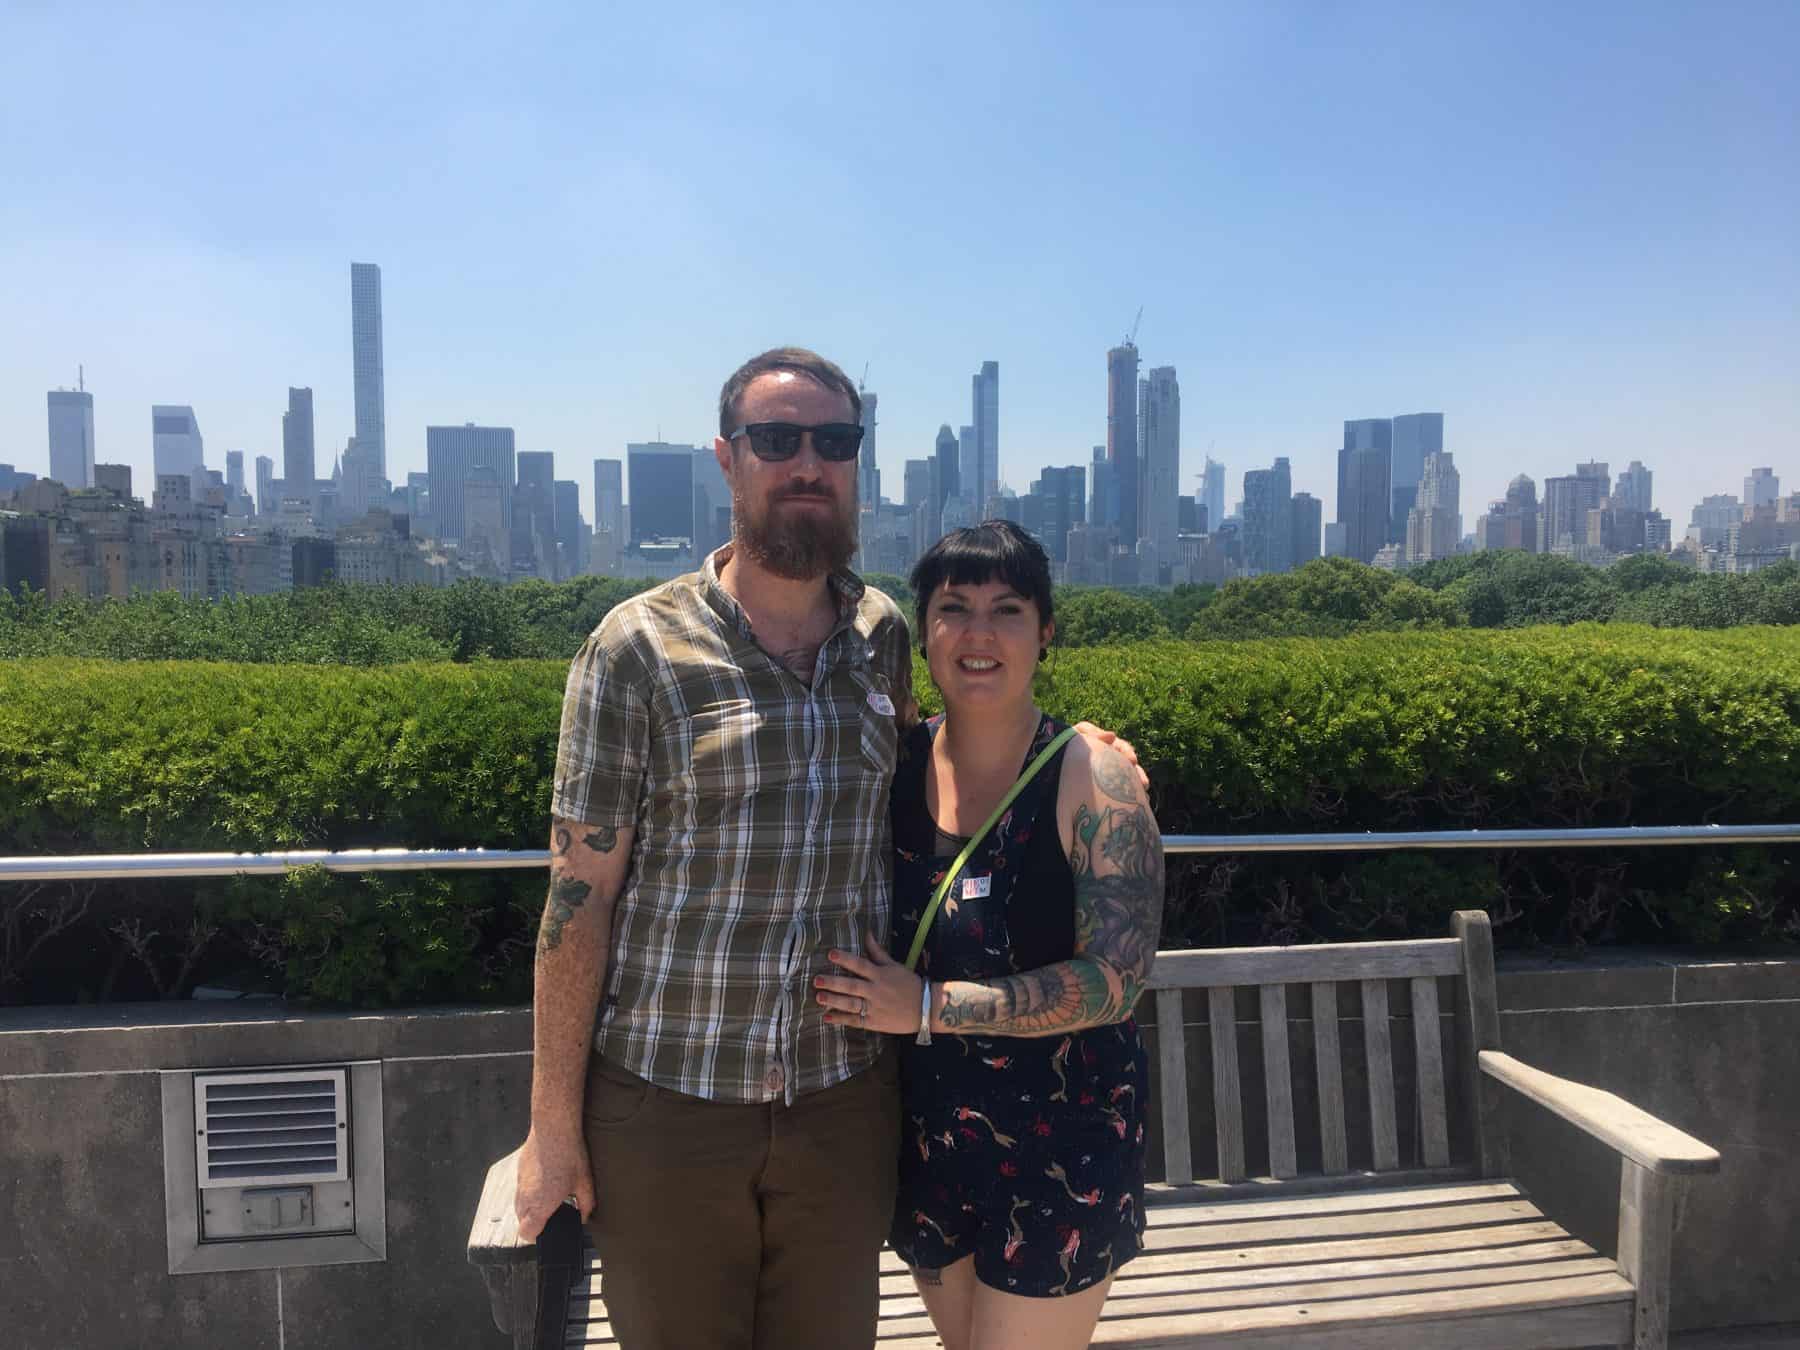 Jessica and her husband on the Cantor Roof Garden.